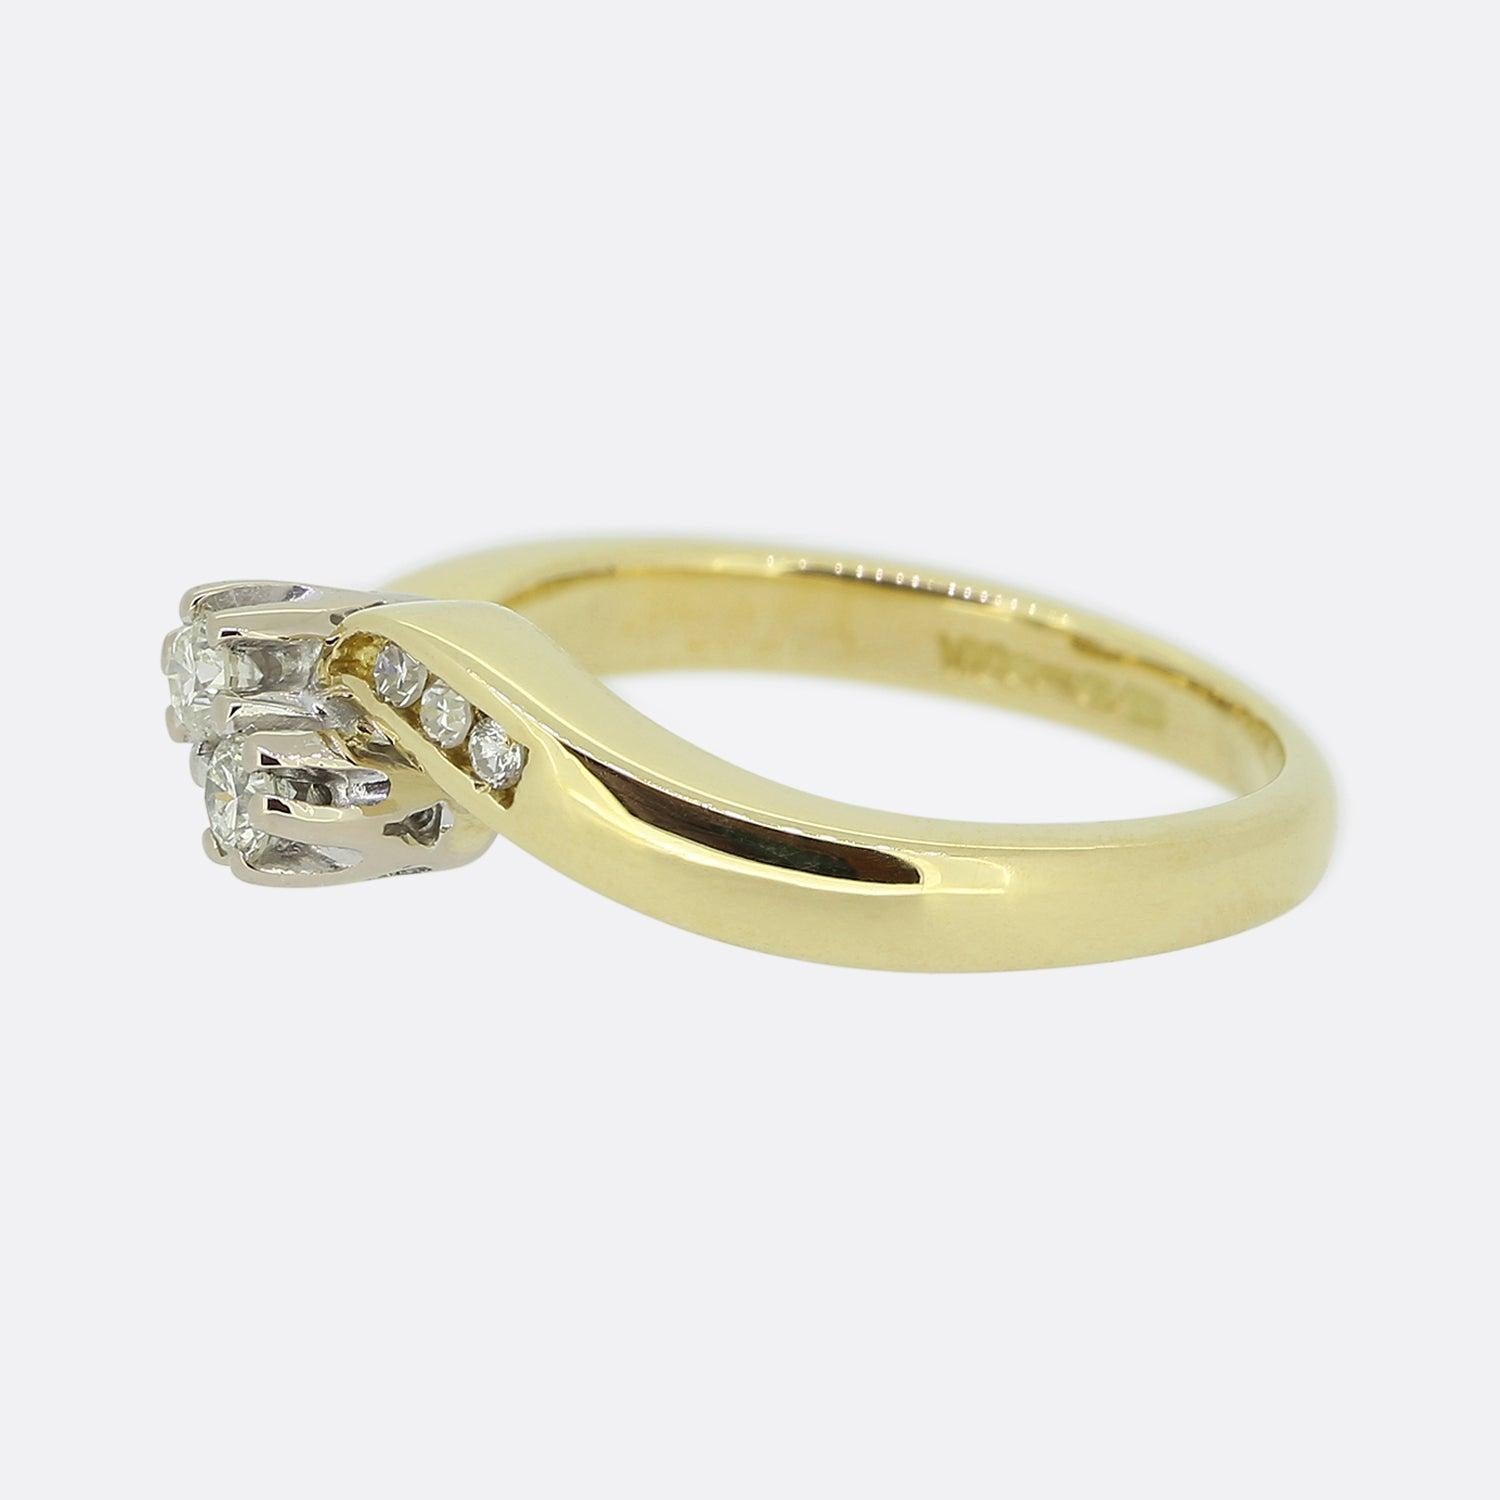 Here we have a classic two-stone diamond ring. This vintage piece has been crafted from 18ct yellow gold and showcases a duo of closely claw set round brilliant cut diamonds in a diagonal fashion. A swirling band acts as the backdrop to these